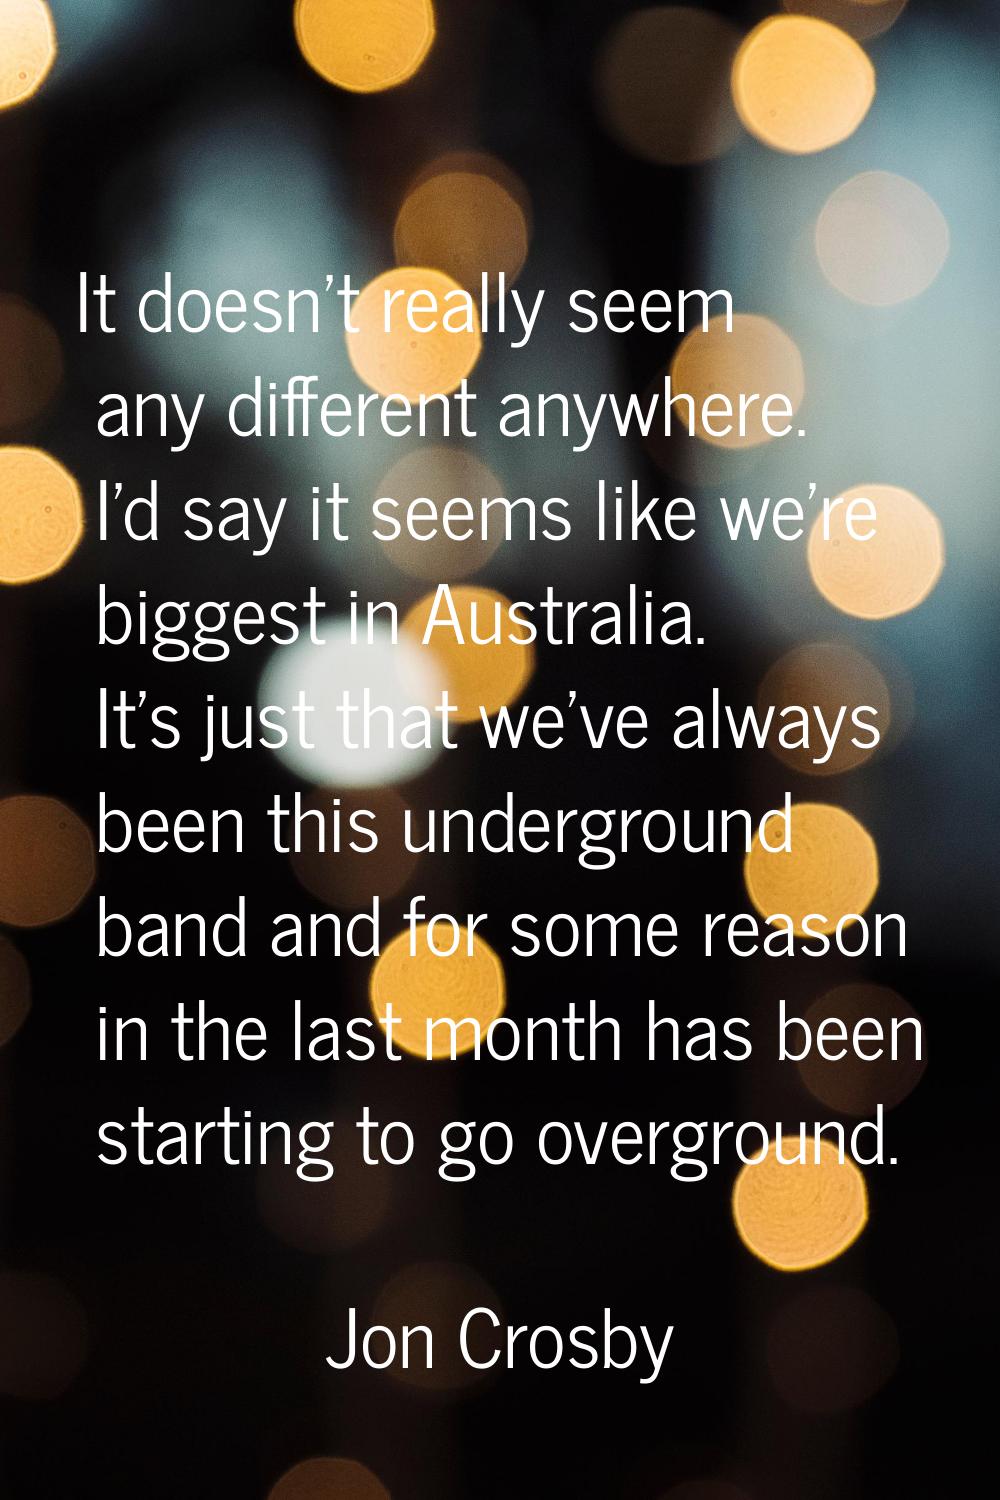 It doesn't really seem any different anywhere. I'd say it seems like we're biggest in Australia. It